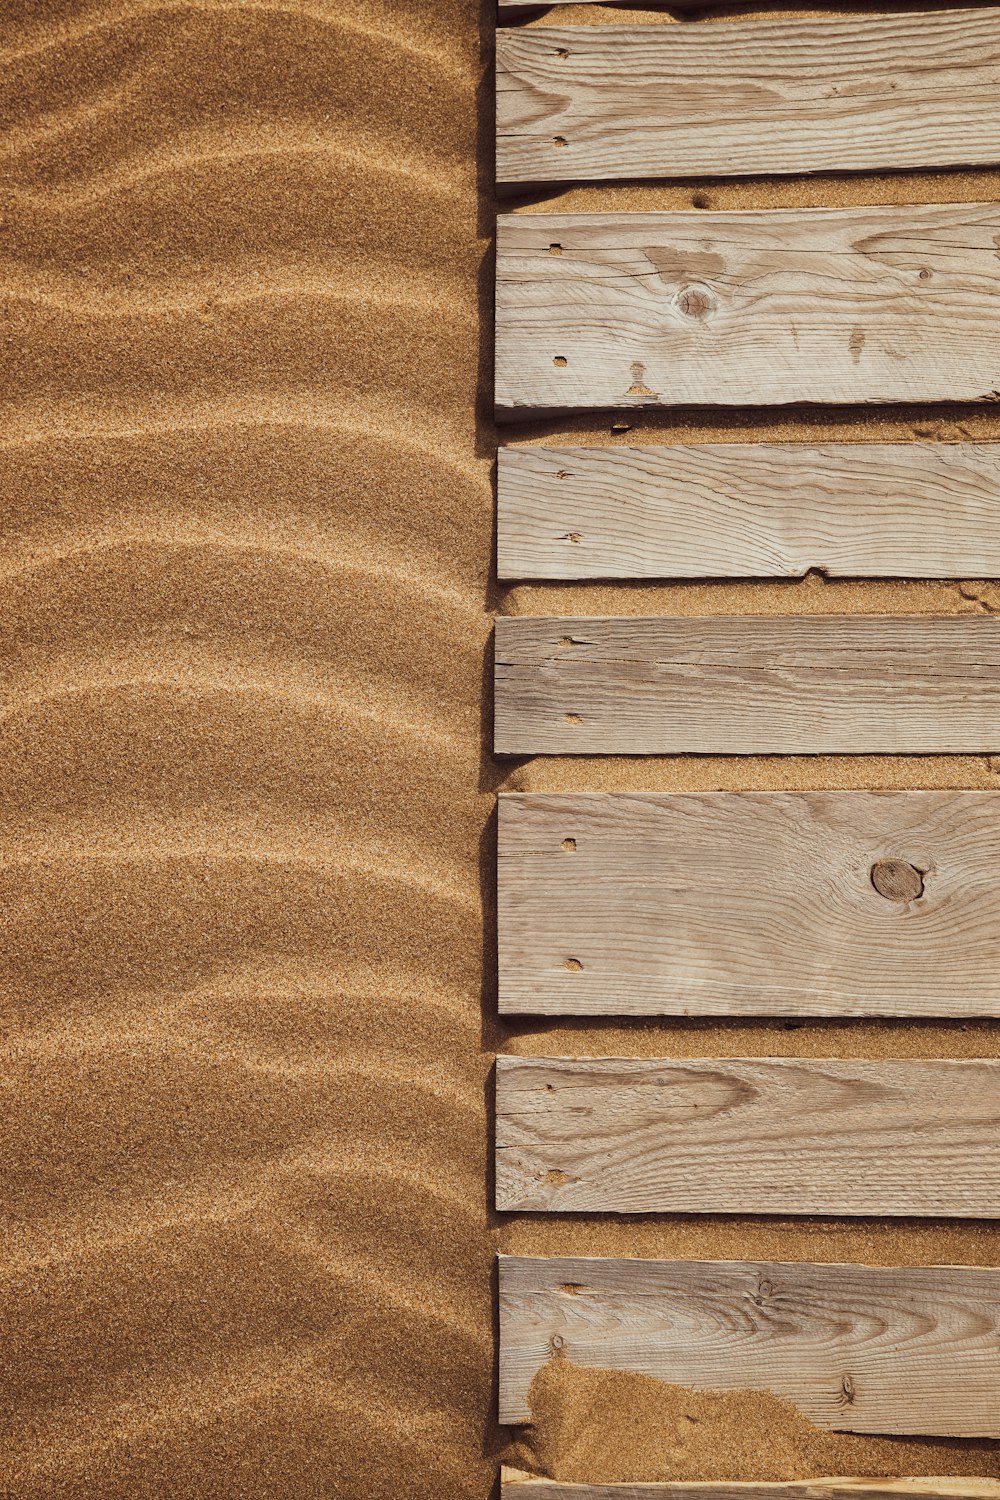 a close up of a wooden plank on a beach